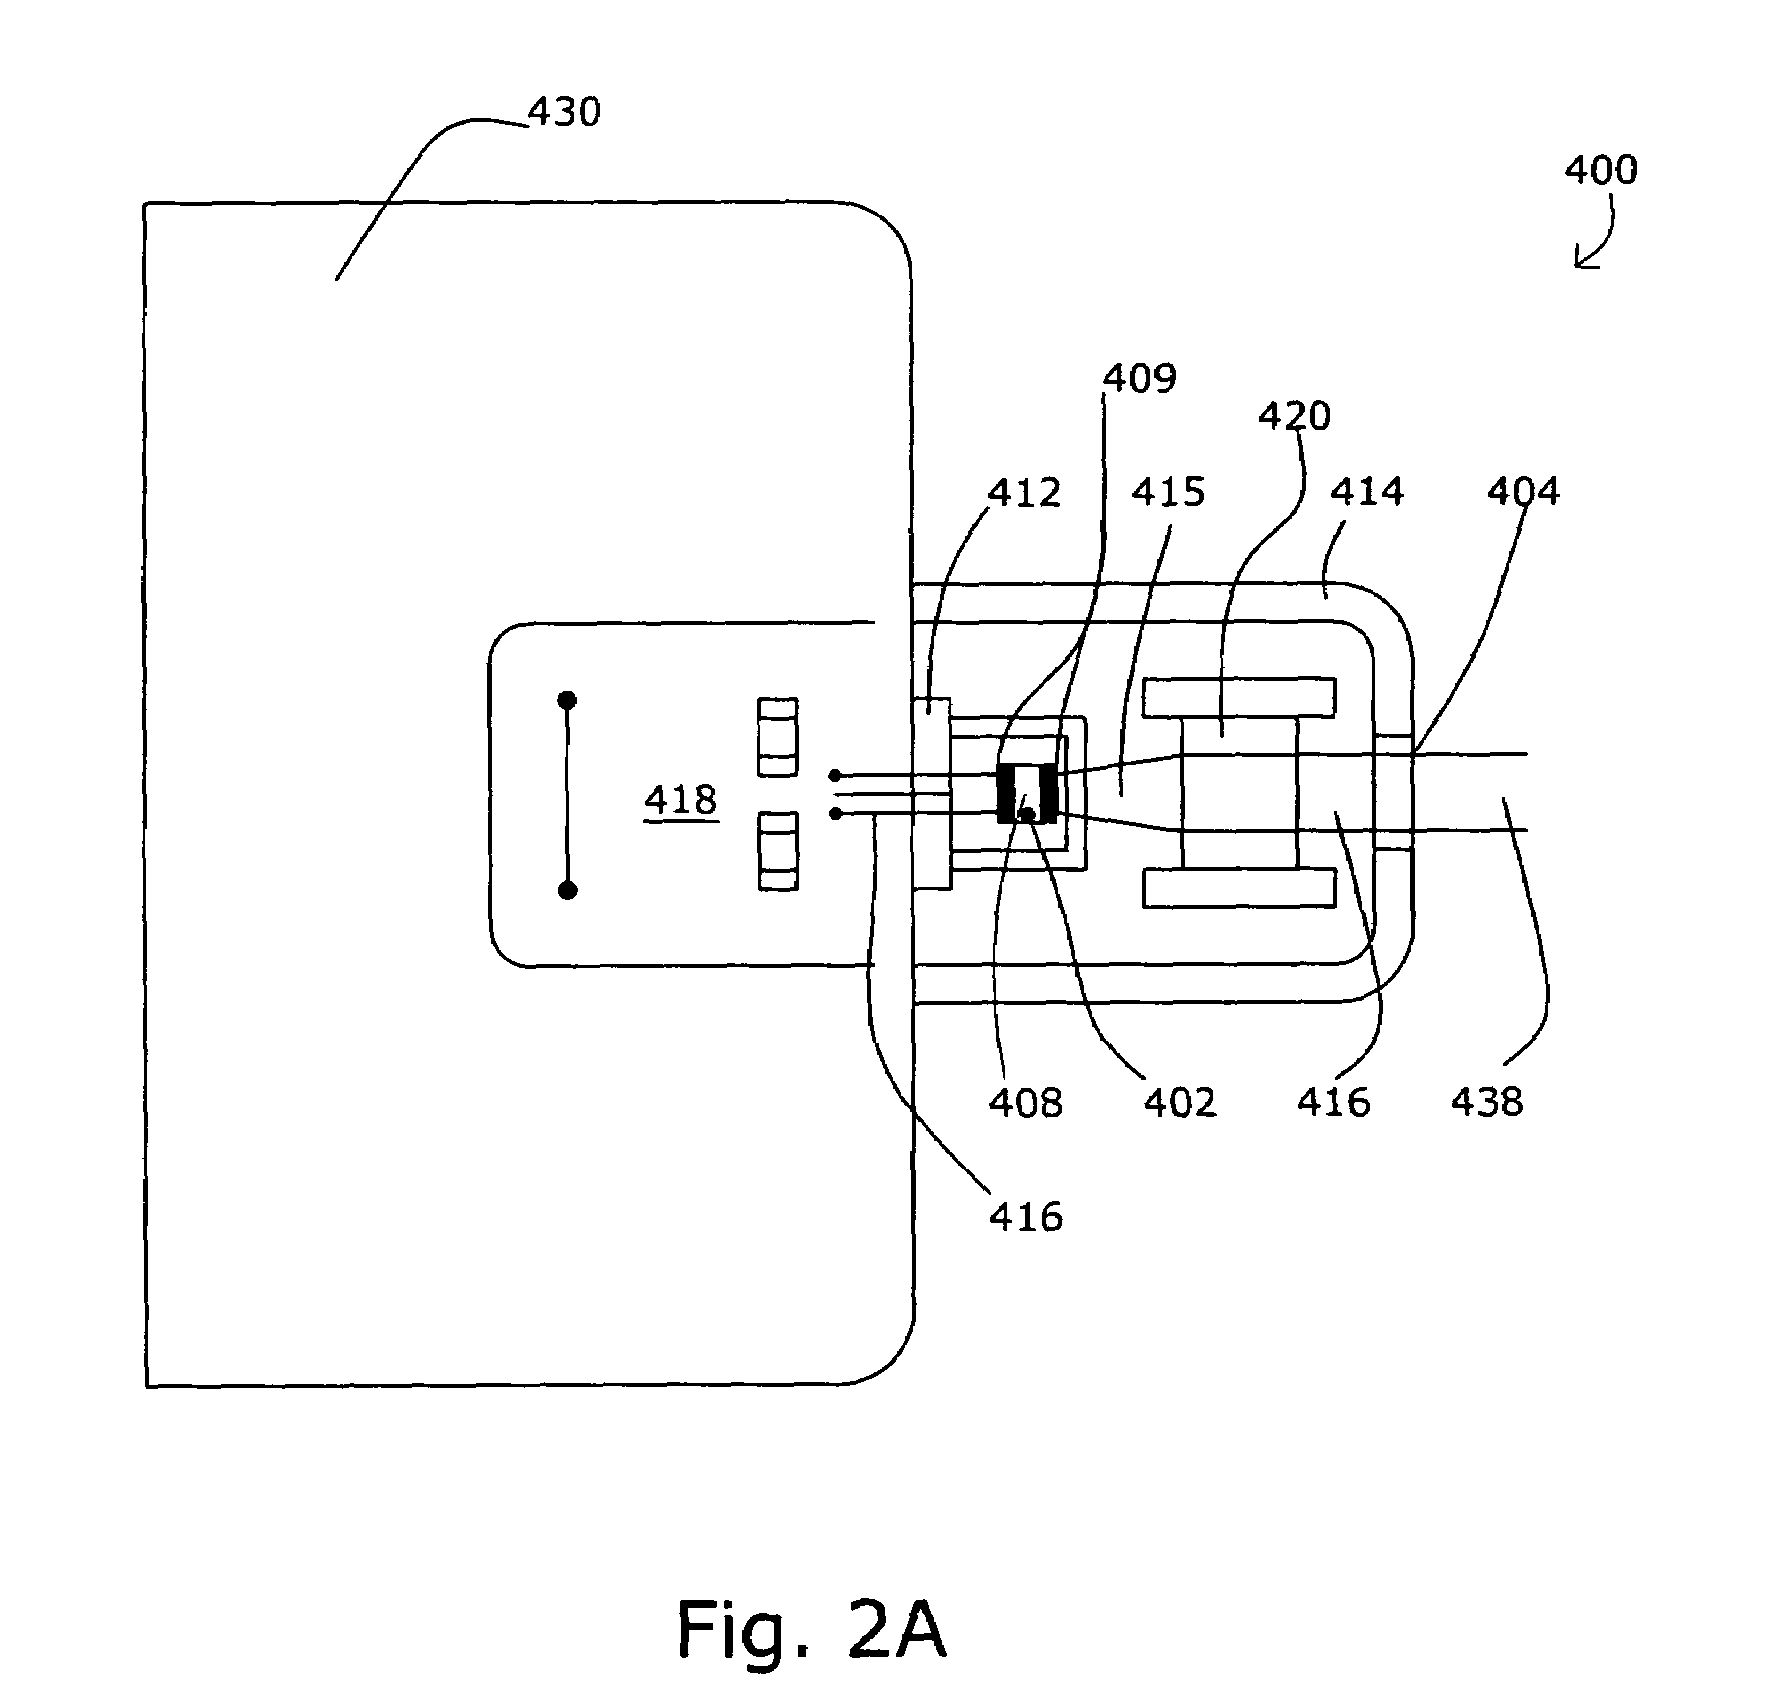 Projection-type display devices with reduced weight and size